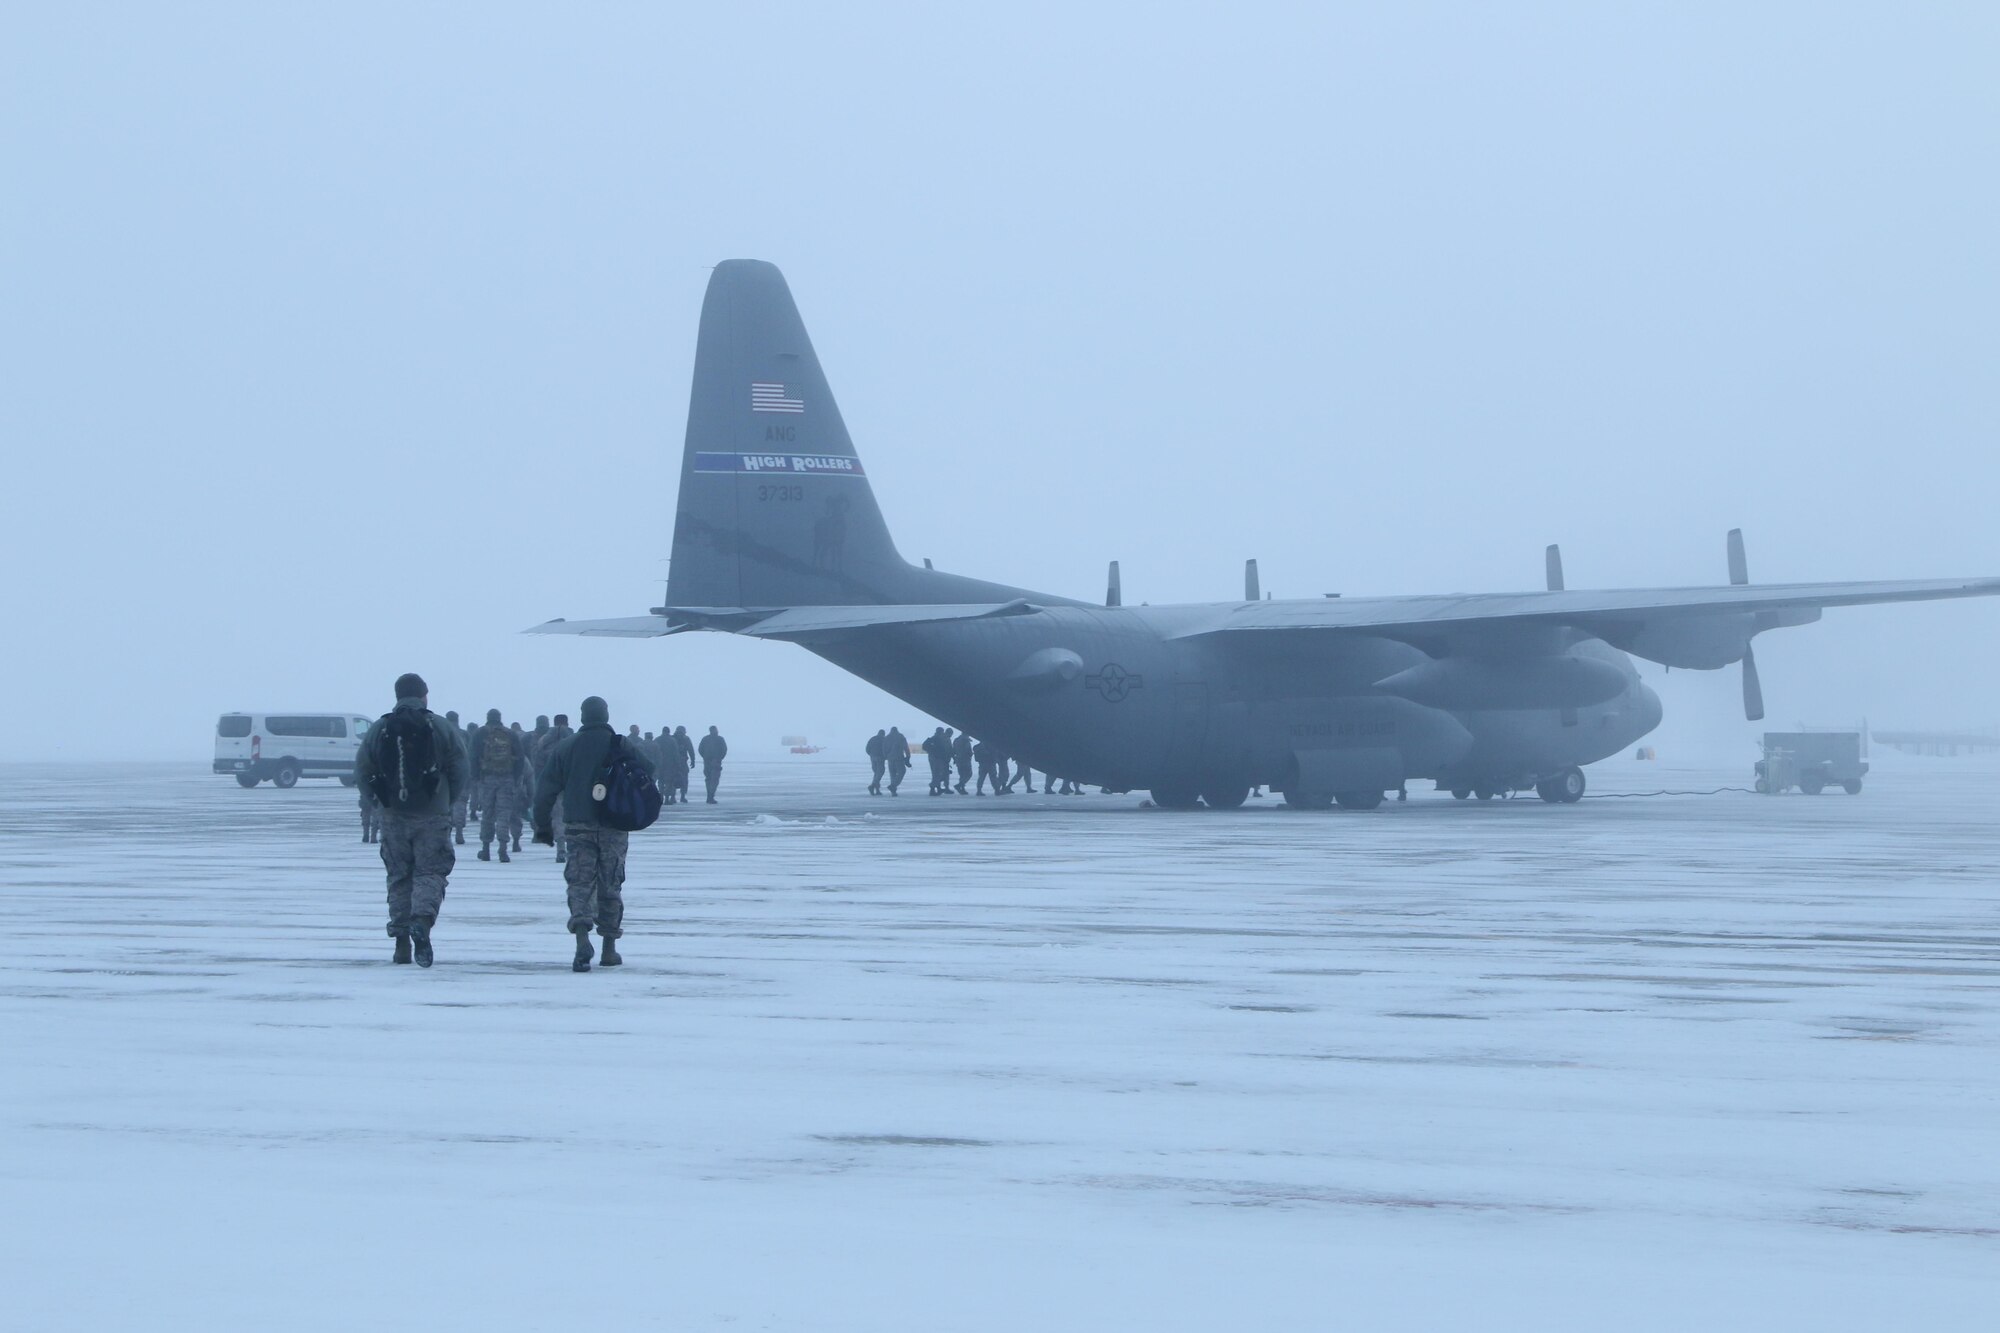 Airmen from the 173rd Fighter Wing walk out in the -13 degree weather to board a Texas Air National Guard C-130 in preperation for the wing's deployment to Tucson, Arizona January 6, 2017 at Kingsley Field in Klamath Falls, Oregon.  The 173rd Fighter Wing spent two weeks training with the Airzona ANG flying dissimilar air combat training with their F-16s.  (U.S. Air National Guard photo by Master Sgt. Jennifer Shirar)